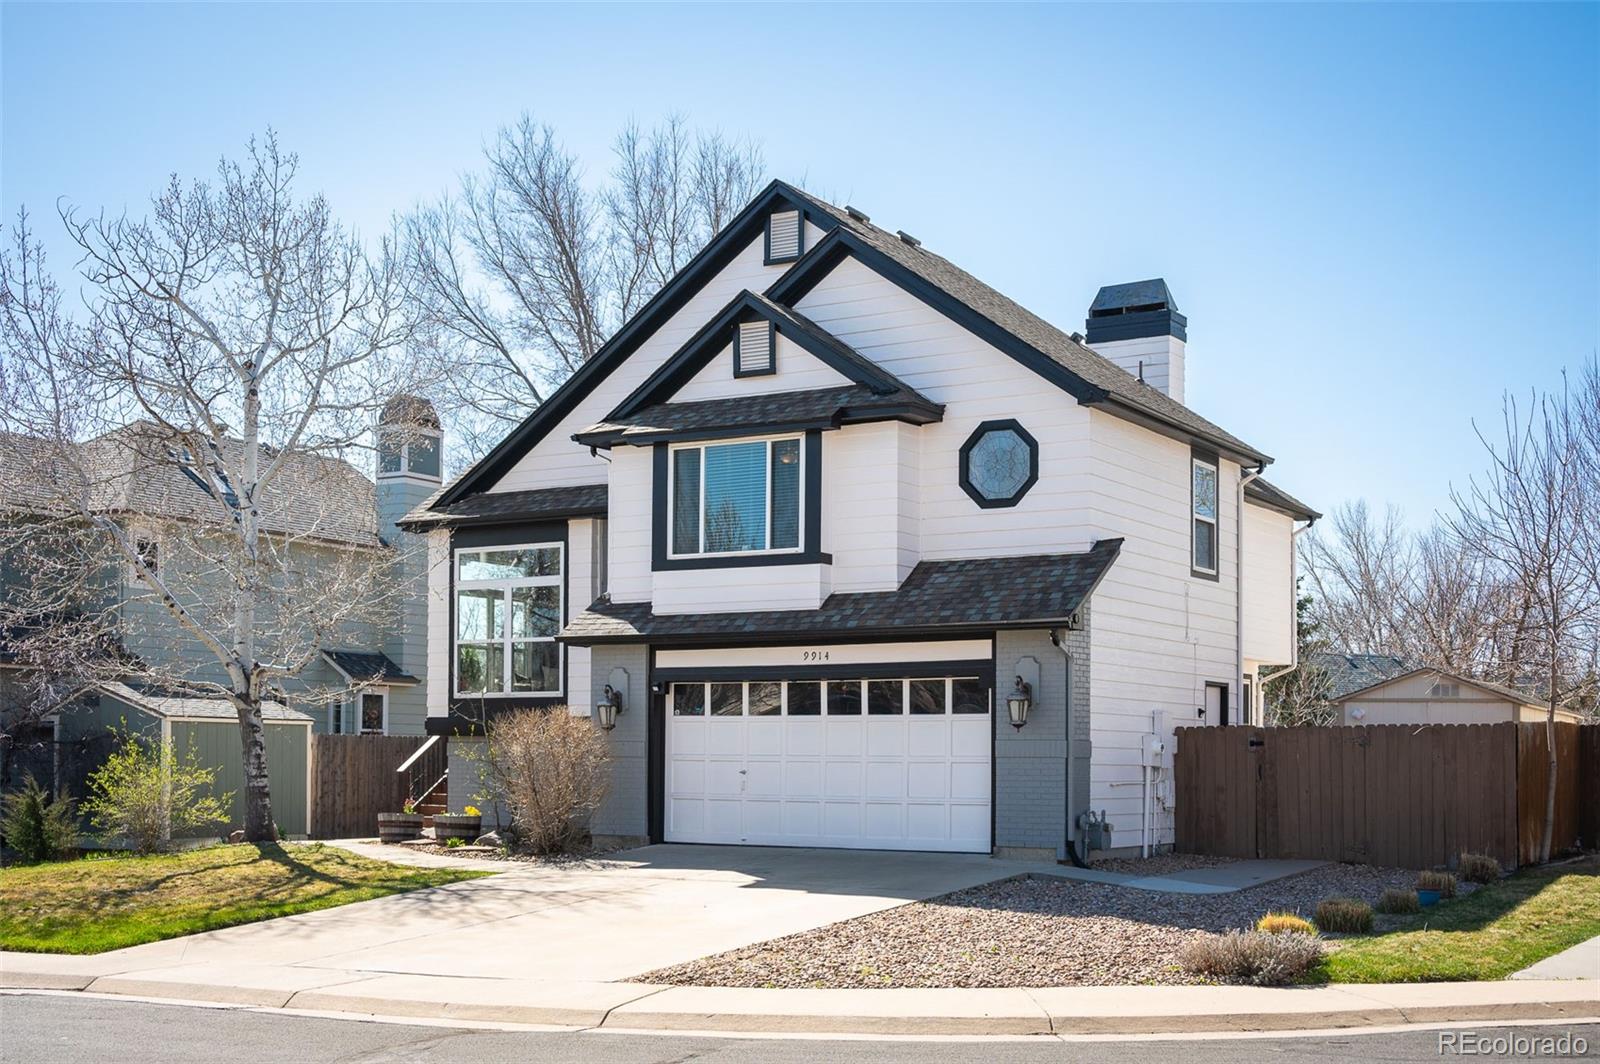 Report Image for 9914 W 106th Place,Broomfield, Colorado